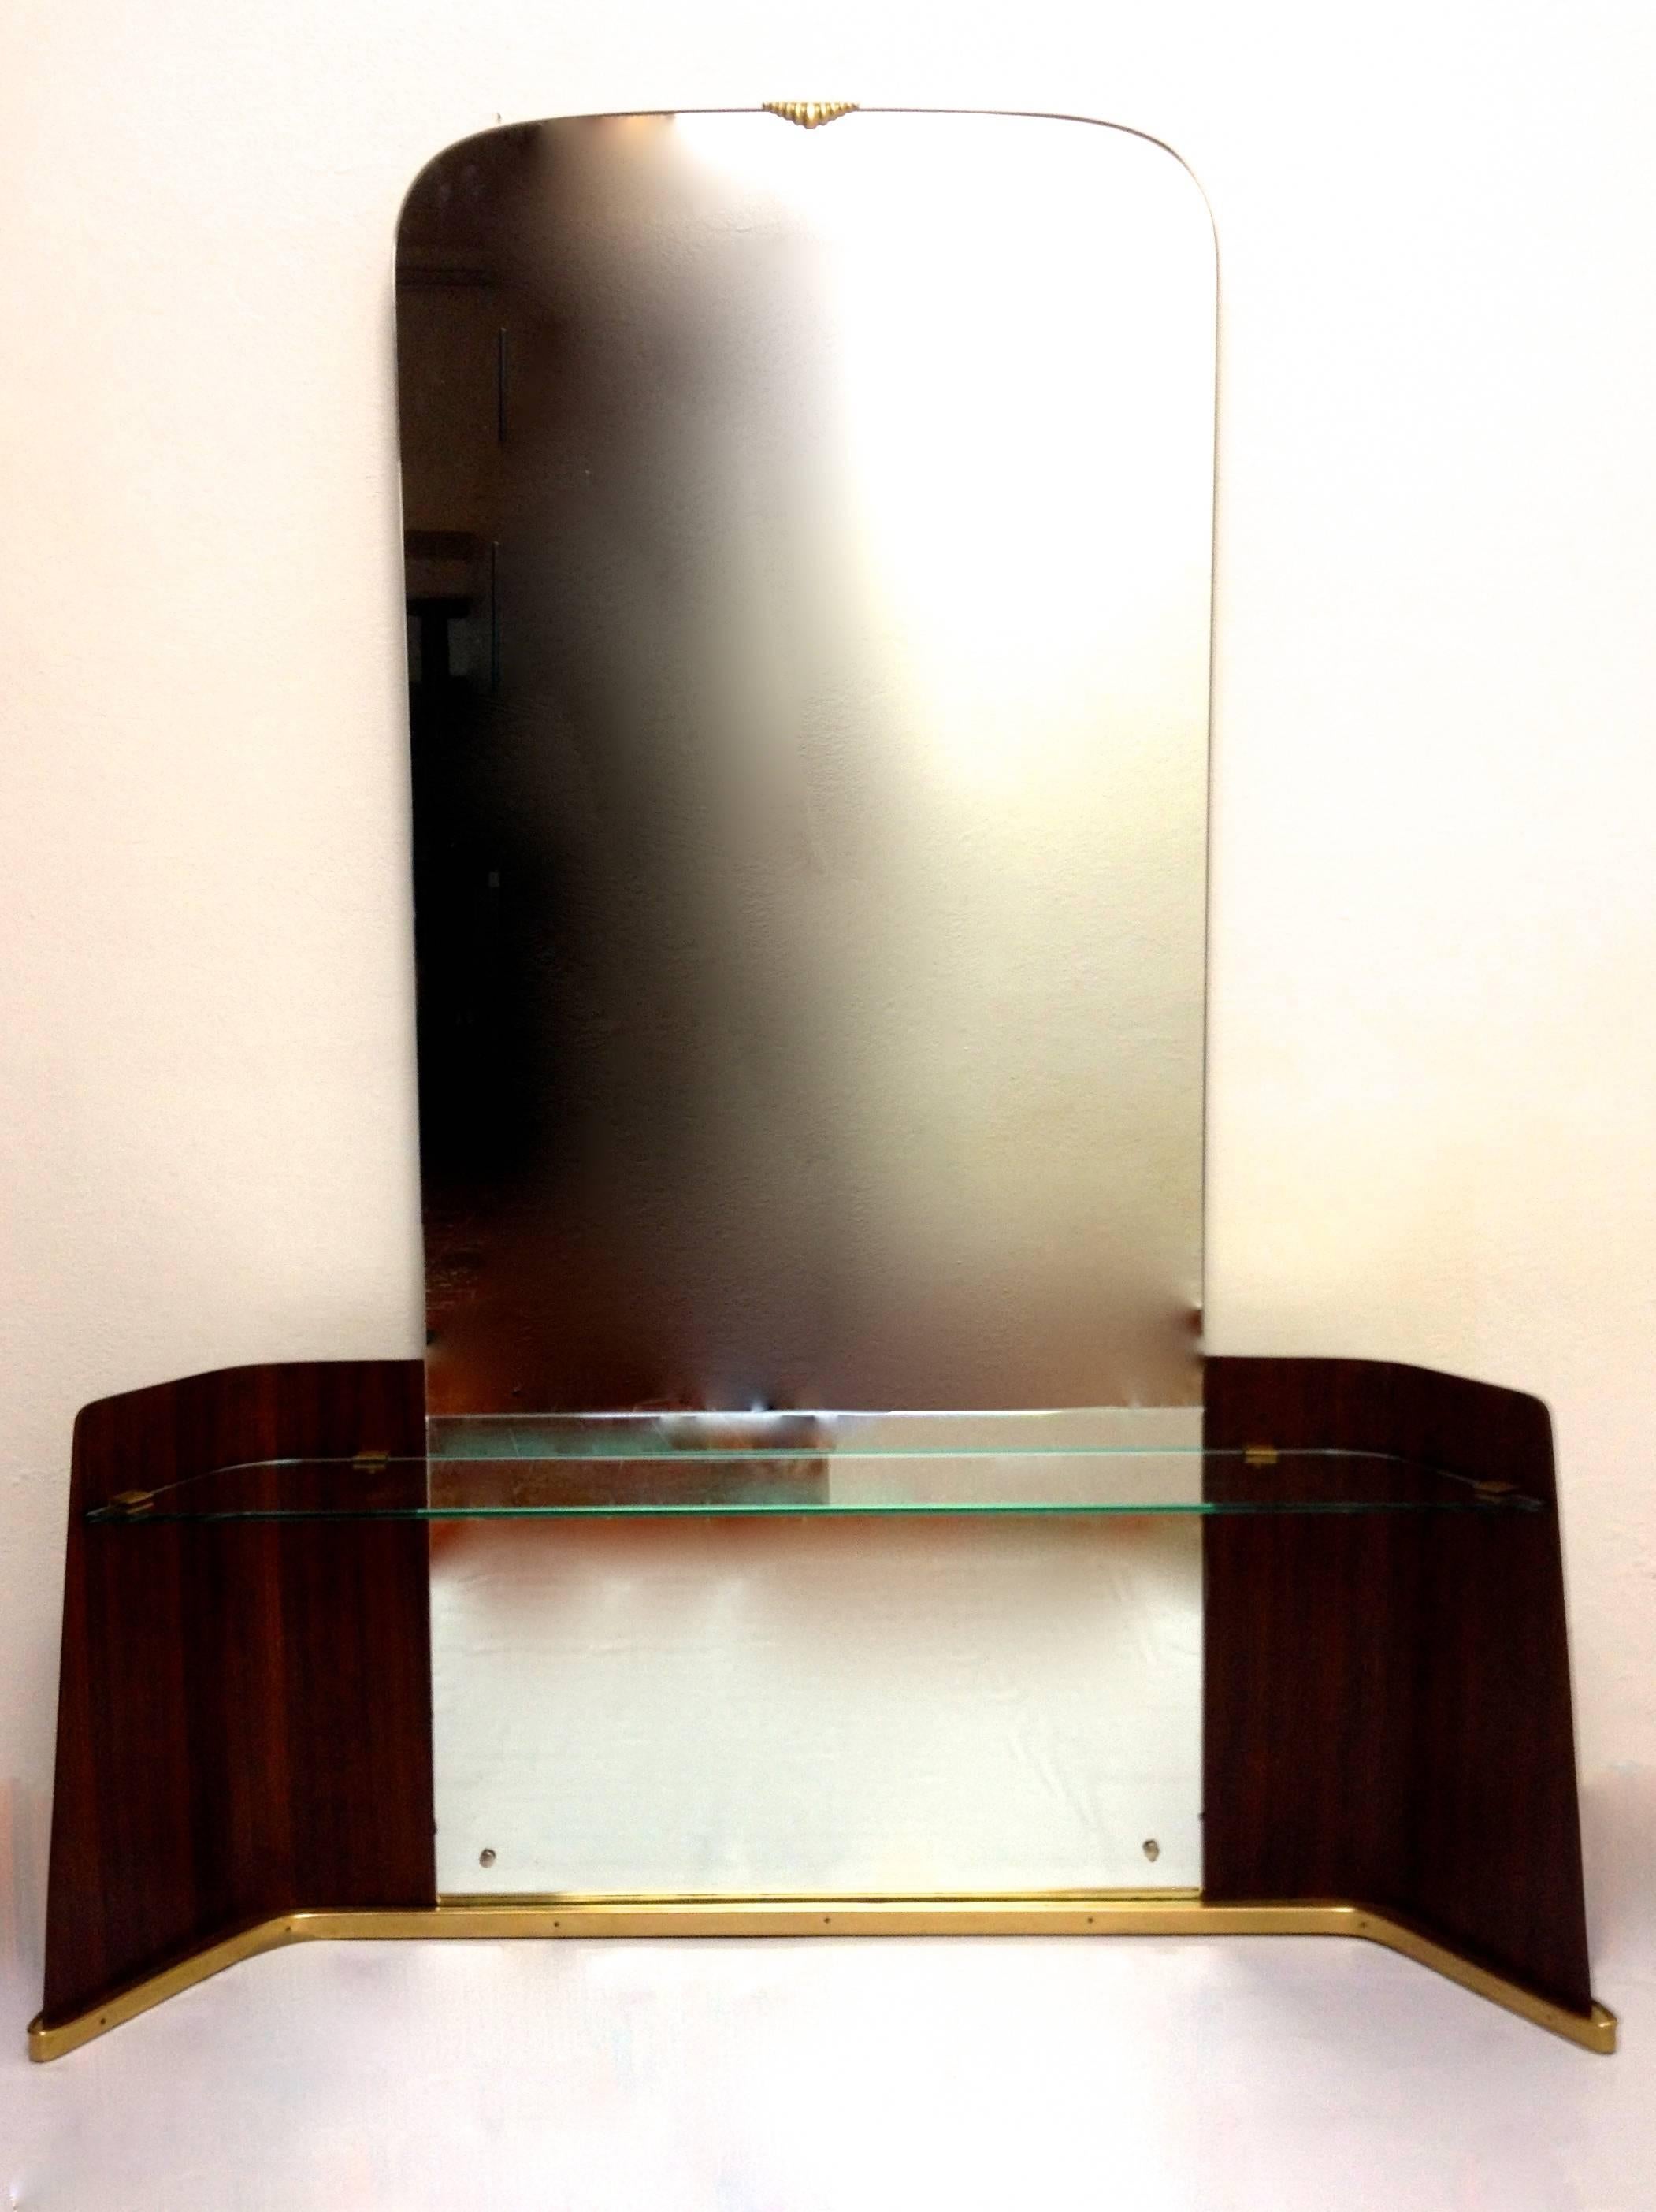 A mirror with glass console, high quality manufactured by Italian company Saffa who executed furniture for a number of iconic designers such as Gio Ponti and Guglielmo Ulrich. This mirror is attributed to Ulrich. It carries the manufacturers stamp